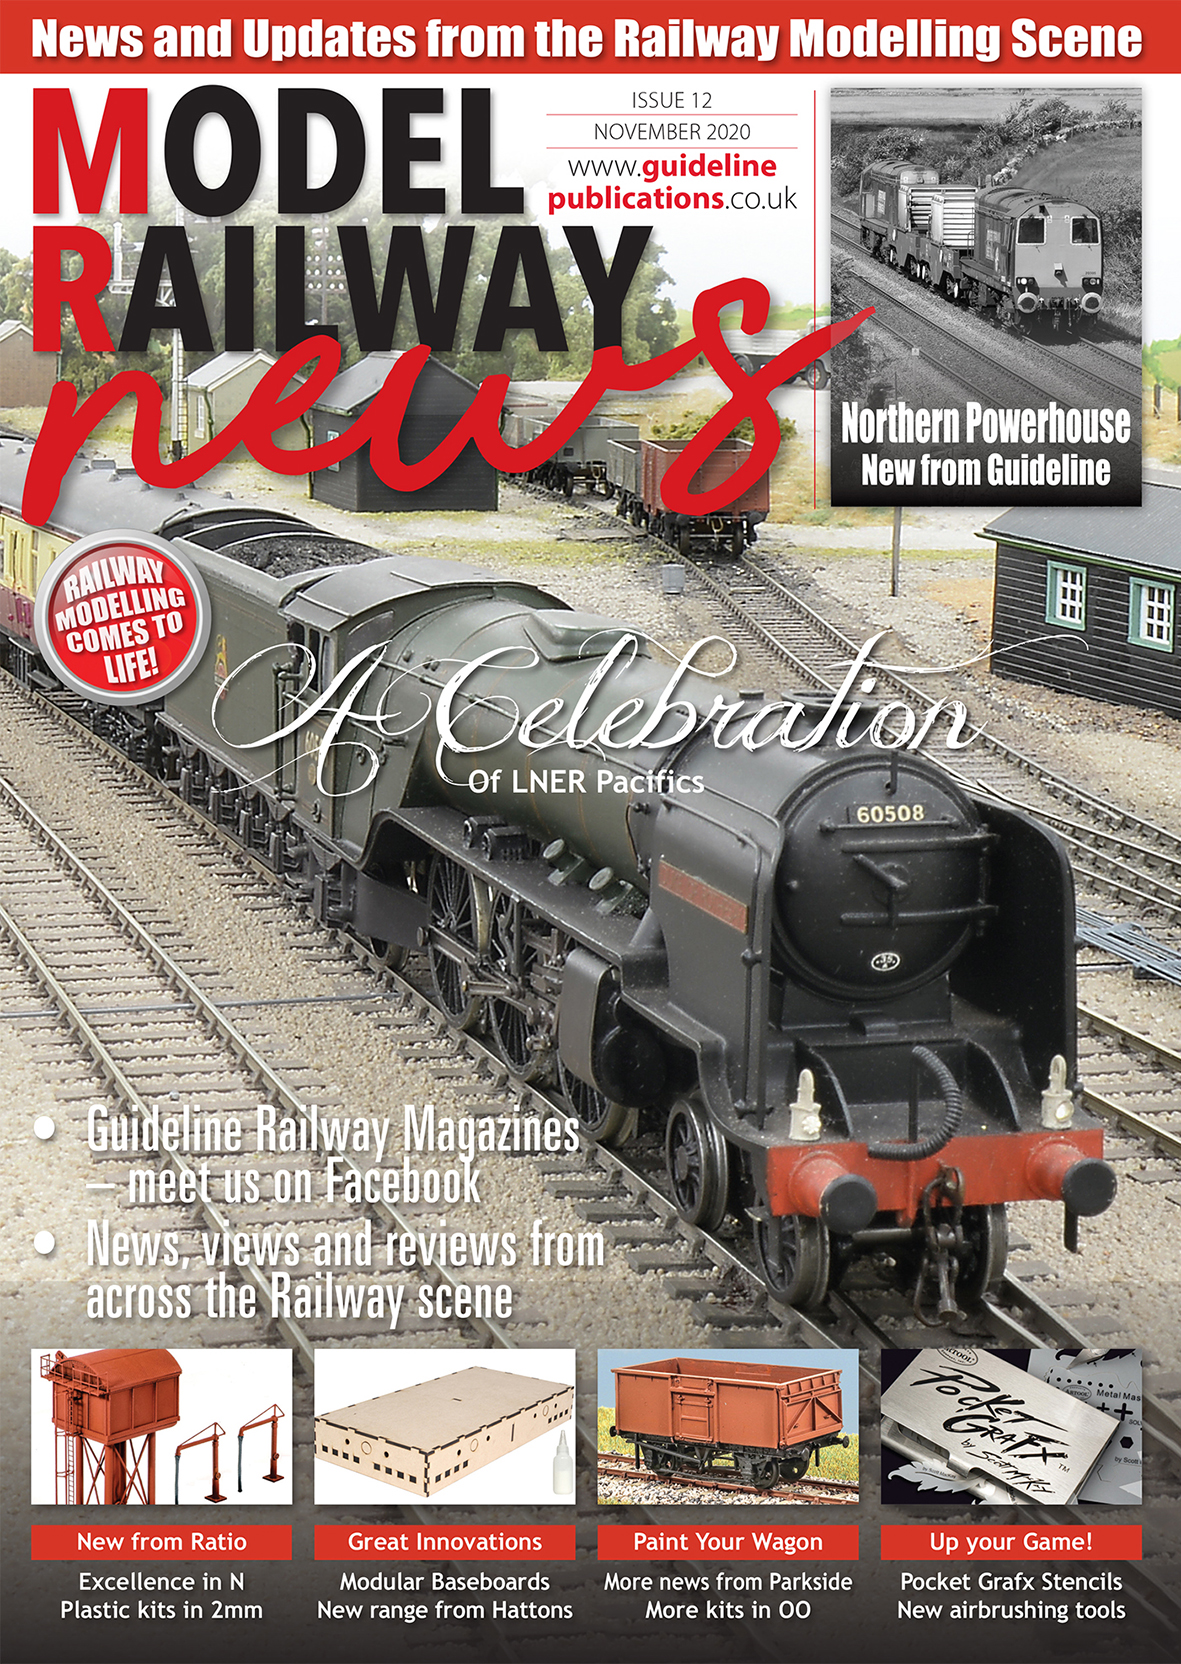 Guideline Publications Model Railway News November Issue 12 Oct2020 